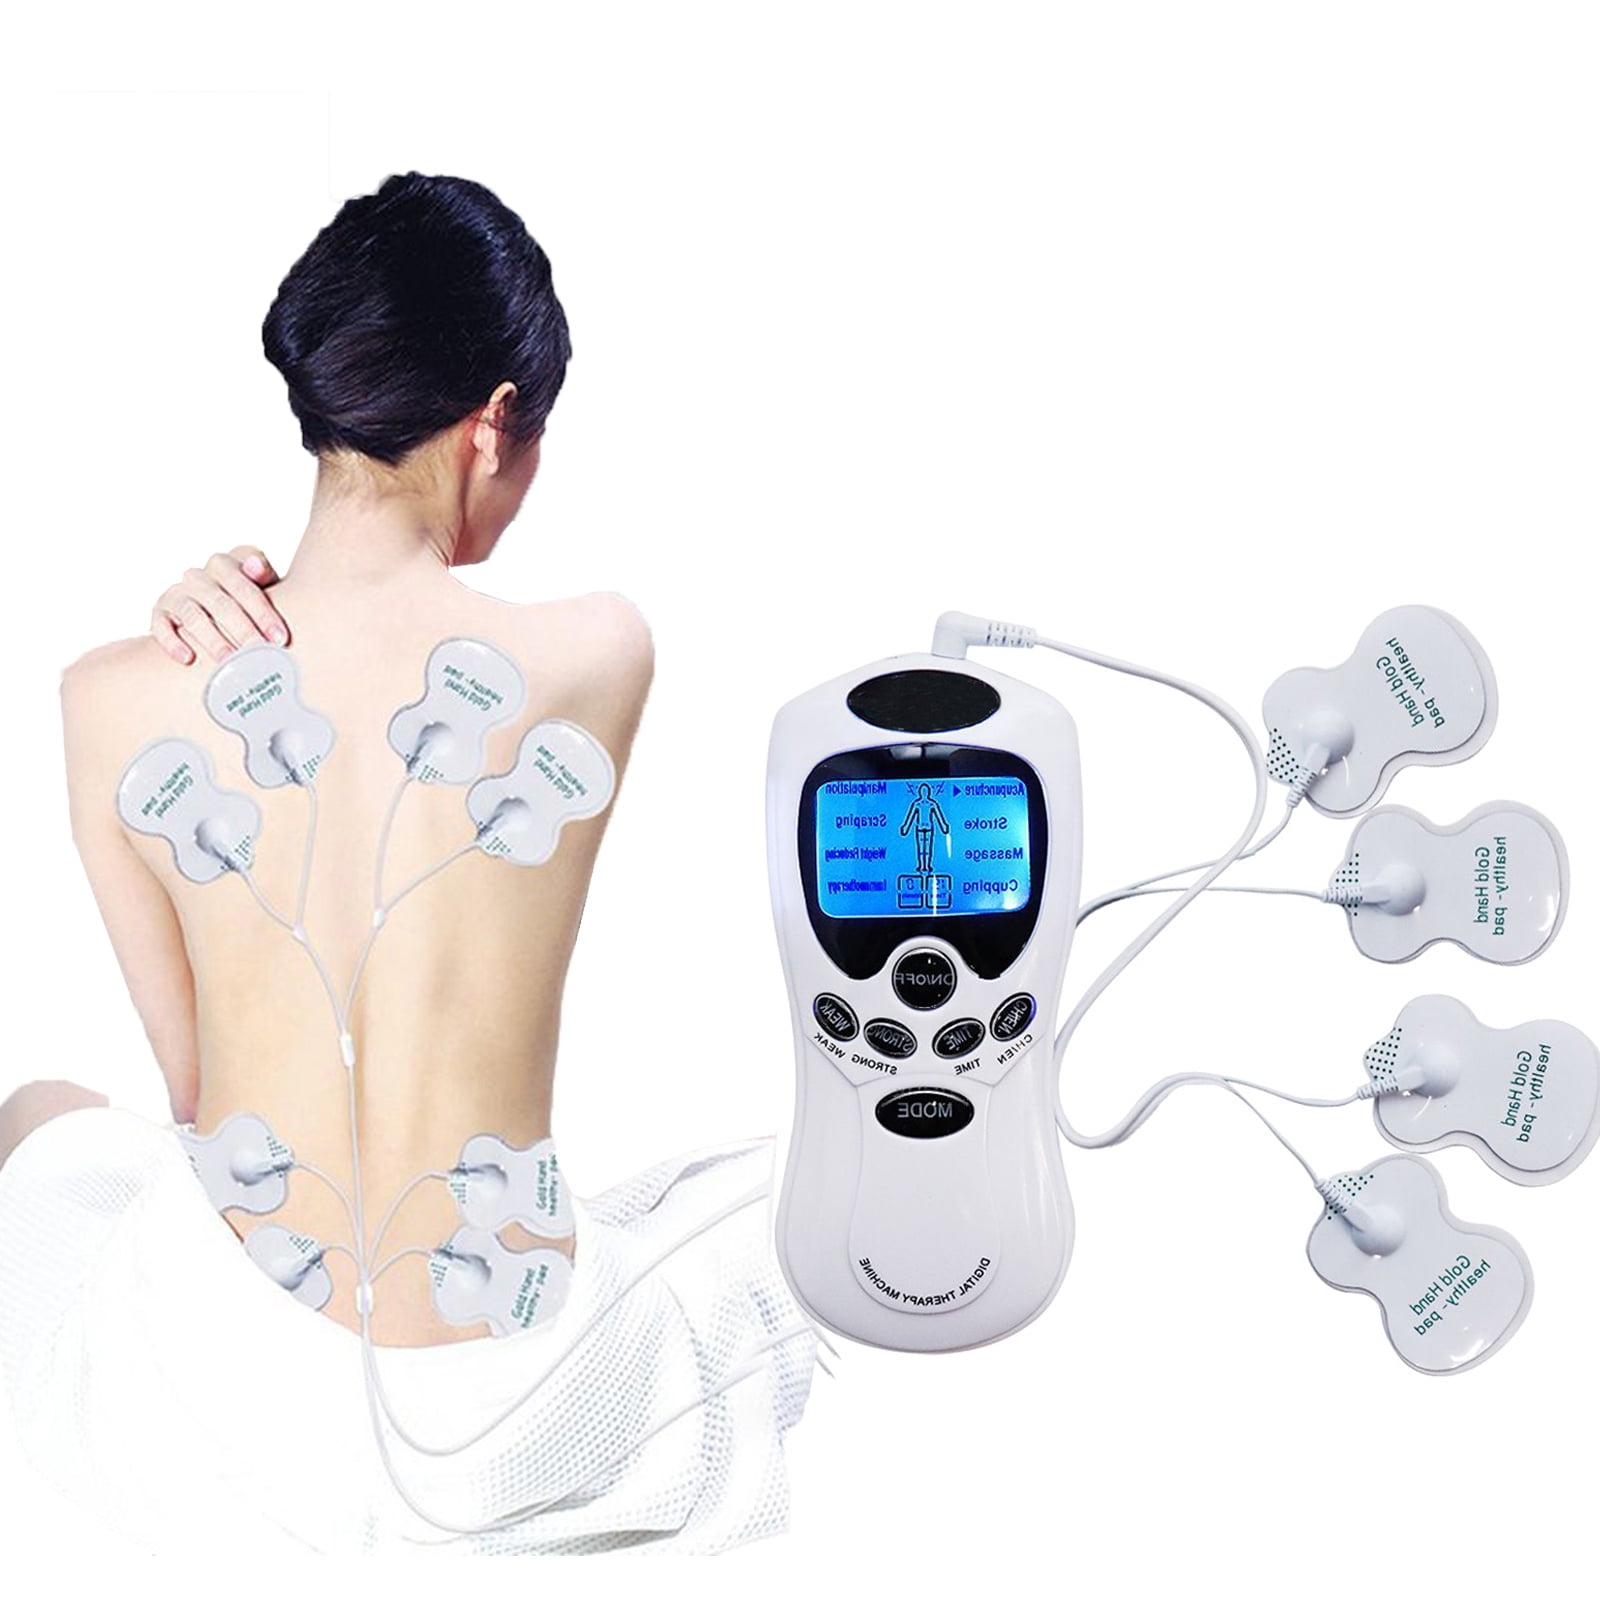 EmgoHeal Electronic Massager and TENS Device with Electronic Pulse